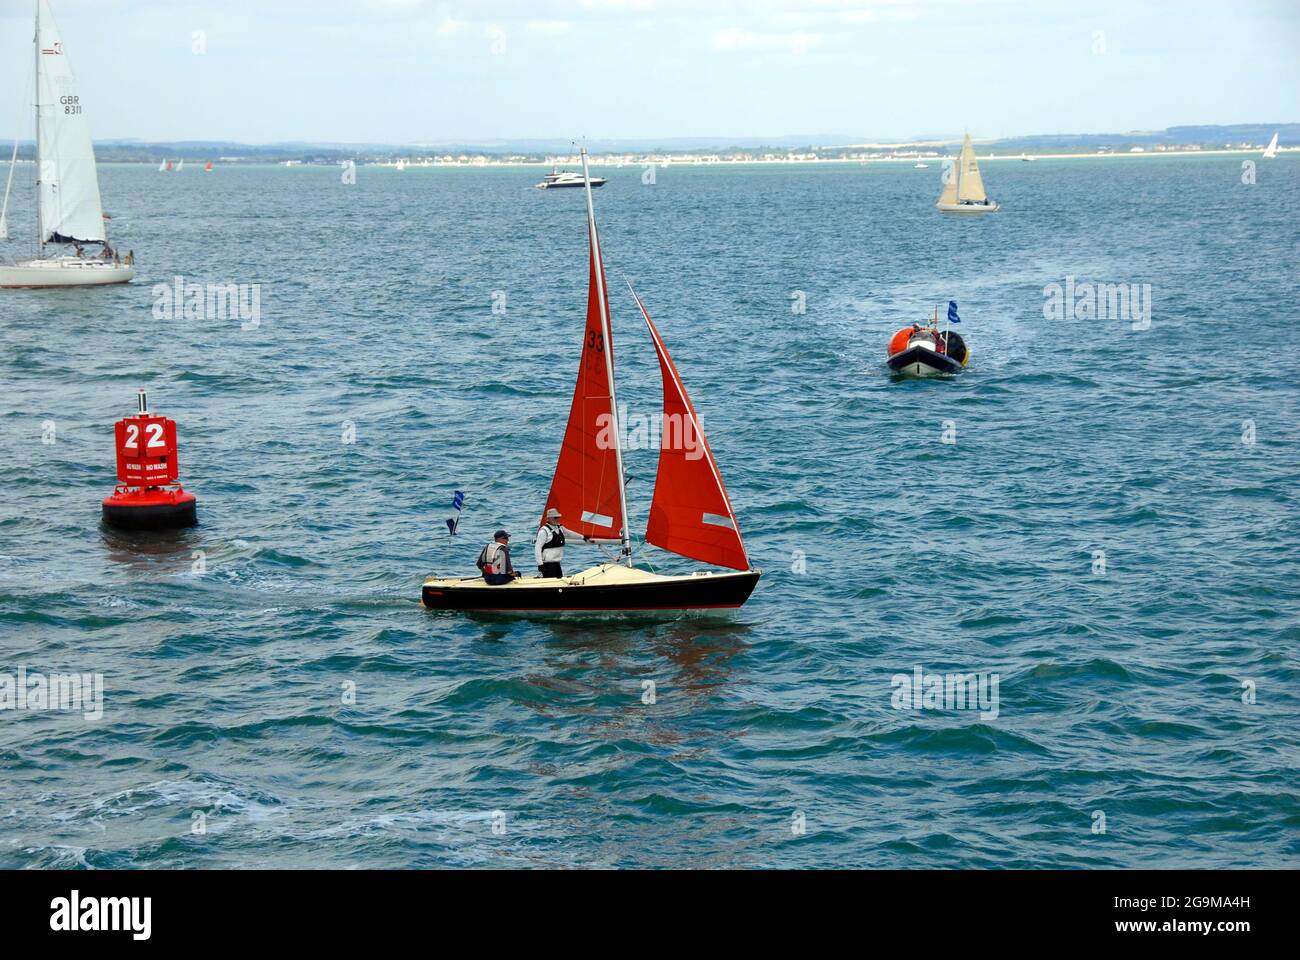 Small yacht with black hull and red/orange sails and two men on board sailing during  Cowes Week regatta, England Stock Photo